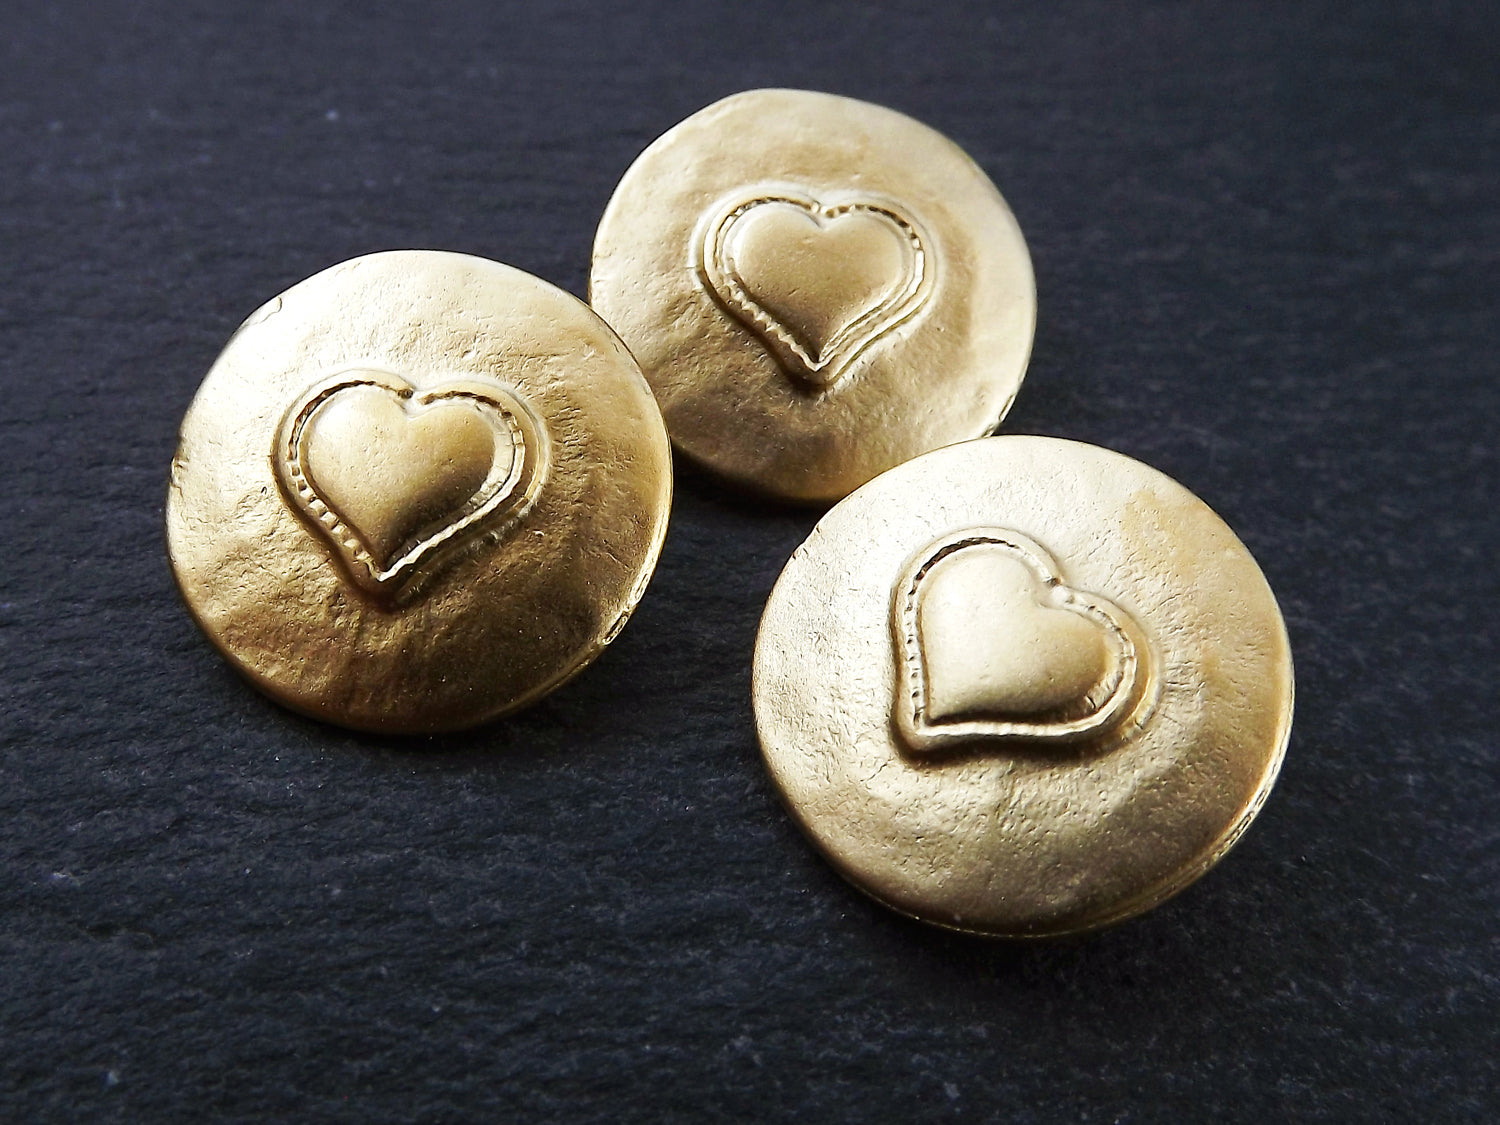 3 Rustic Metal Heart Buttons 22k Matte Gold Plated - Round Silver Buttons, Metal Shank Button, Sewing Buttons, Jewelry Making Buttons